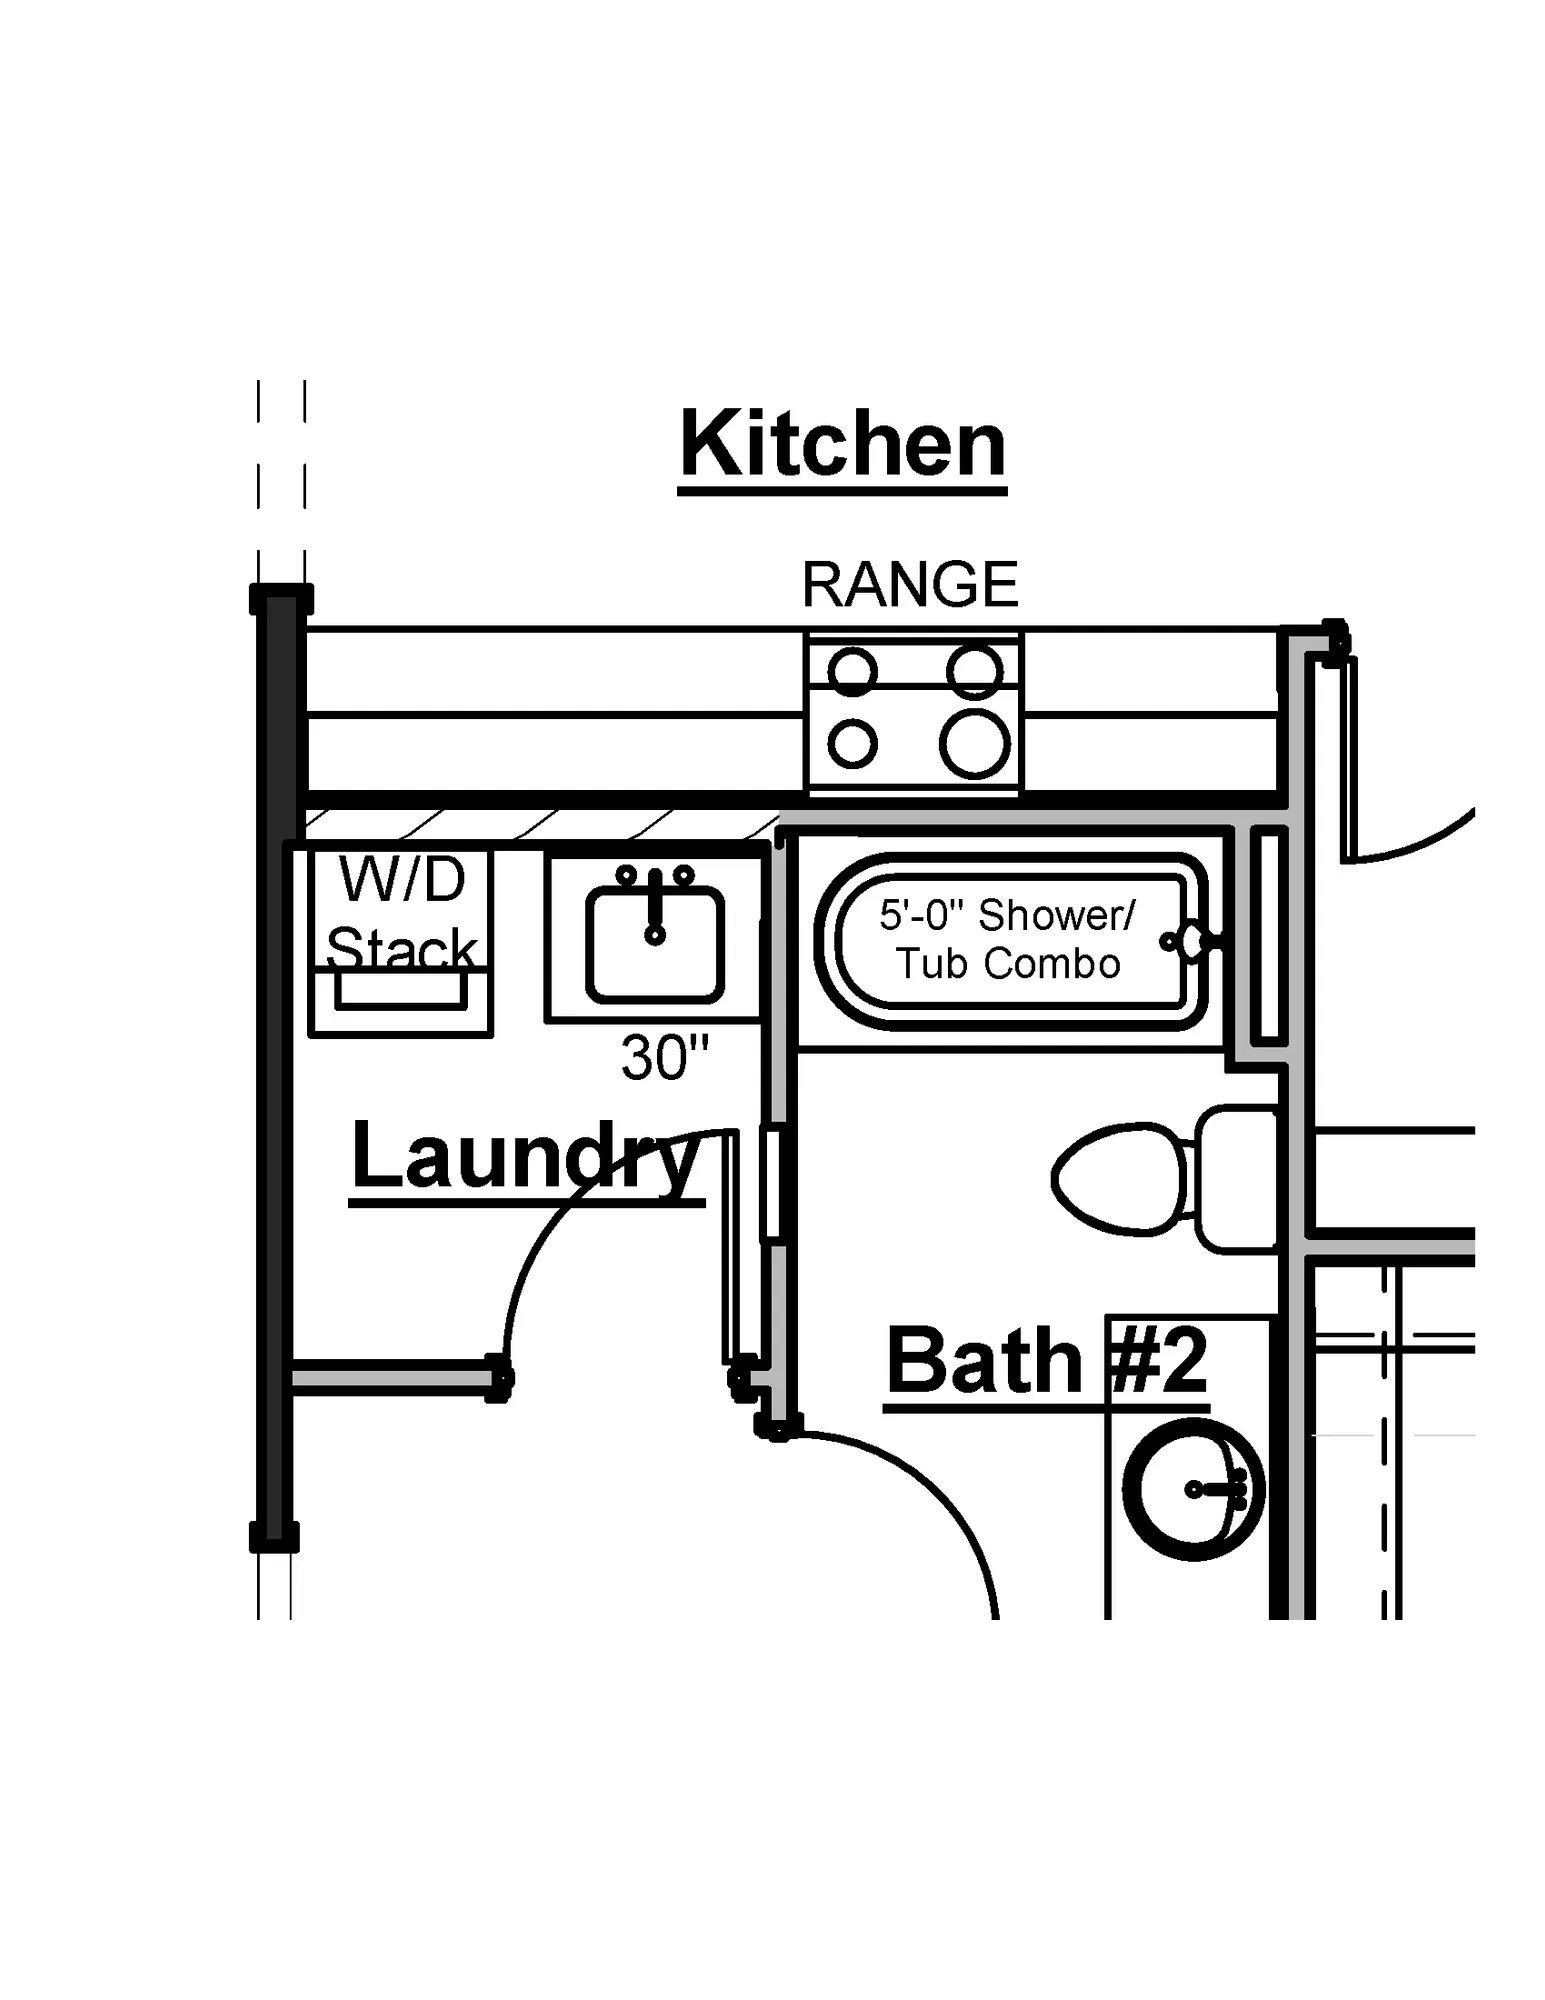 Laundry Sink Washer Dryer Stack - undefined